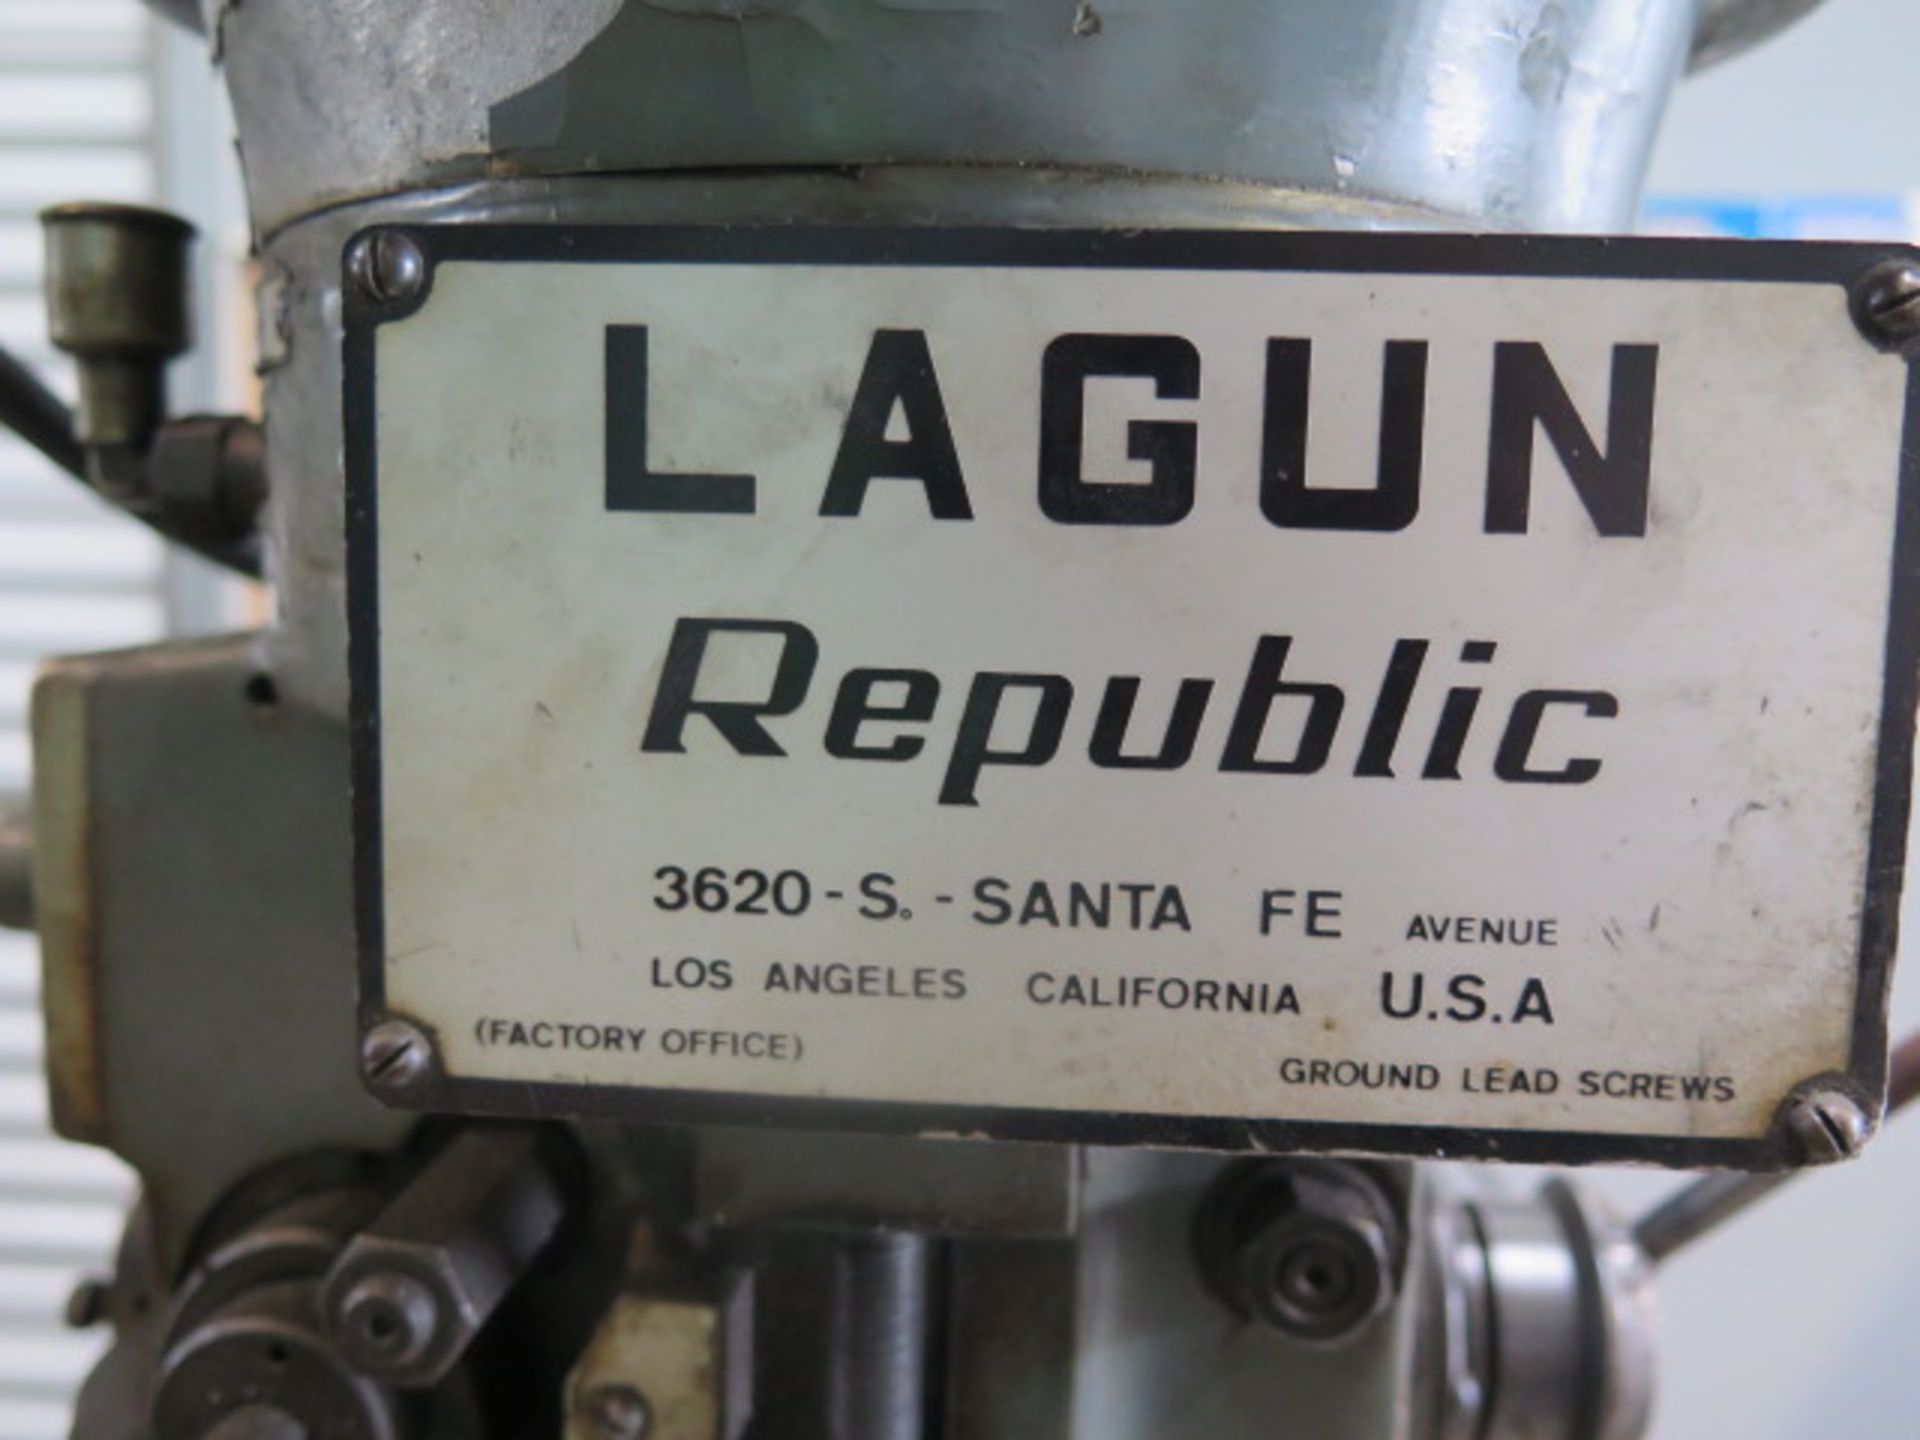 Lagun FT-2 Vertical Mill w/ 55-2940 RPM, 8-Speeds, Chrome Ways, Power Feed, 9” x 48” SOLD AS IS - Image 10 of 10